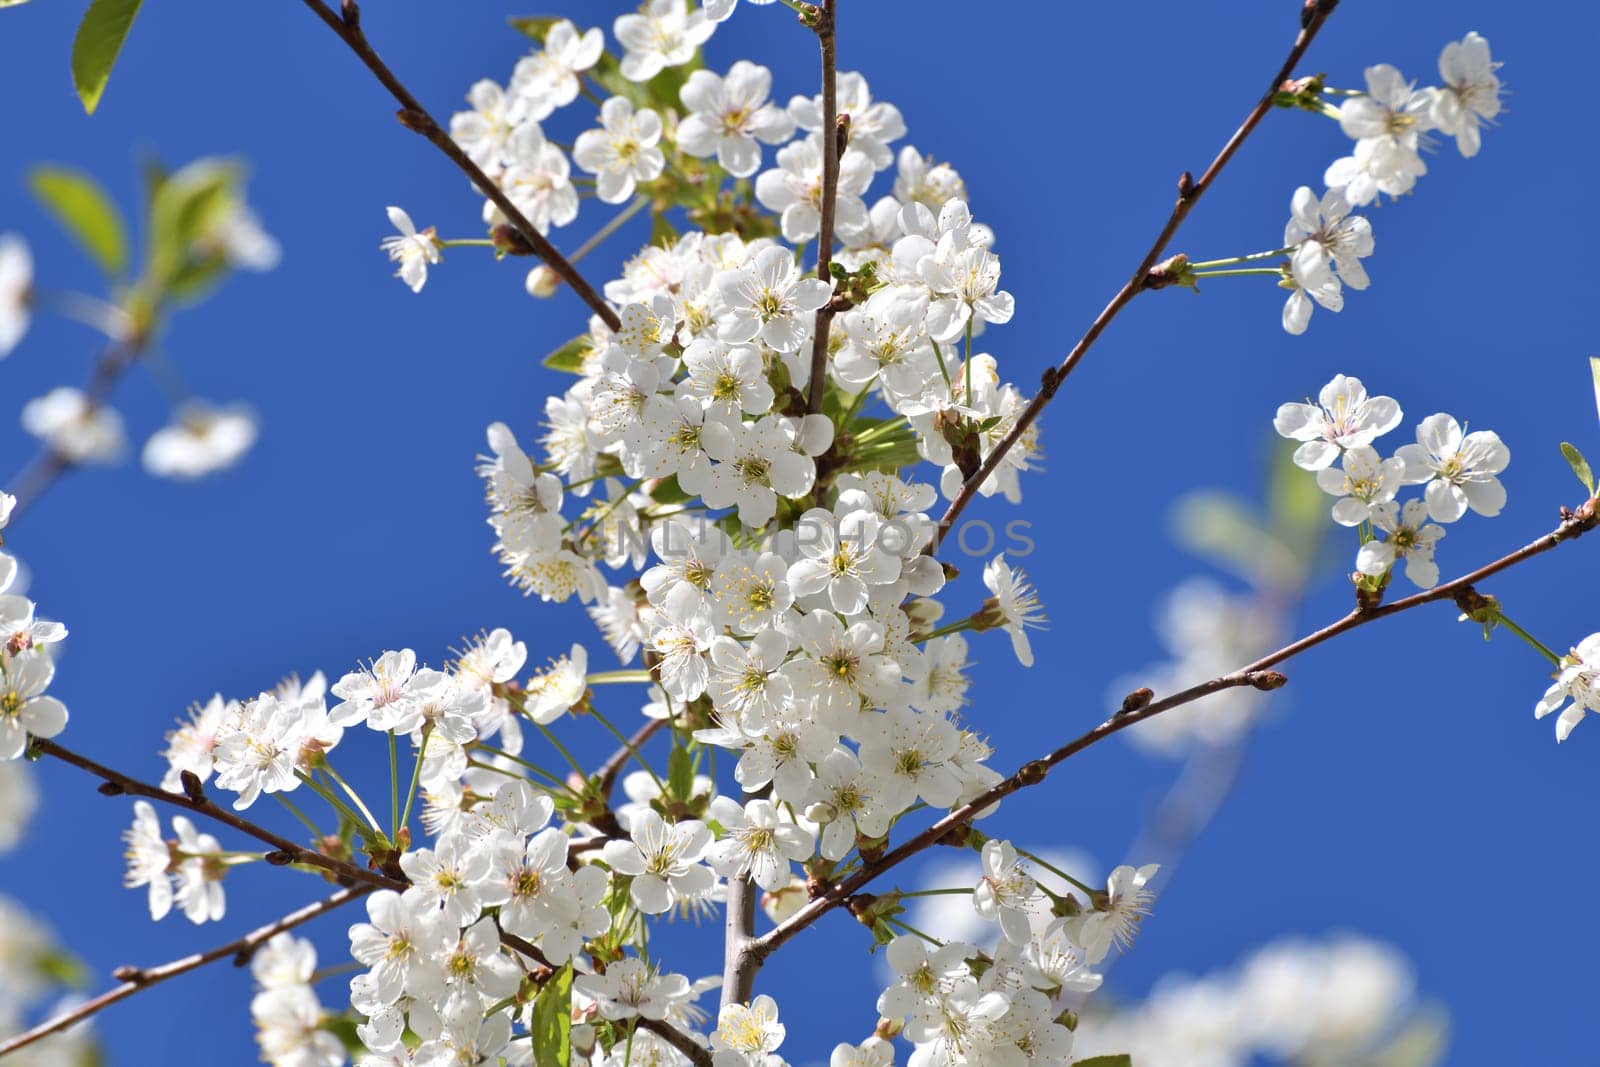 A sprig of white cherry blossoms against a blue sky by olgavolodina